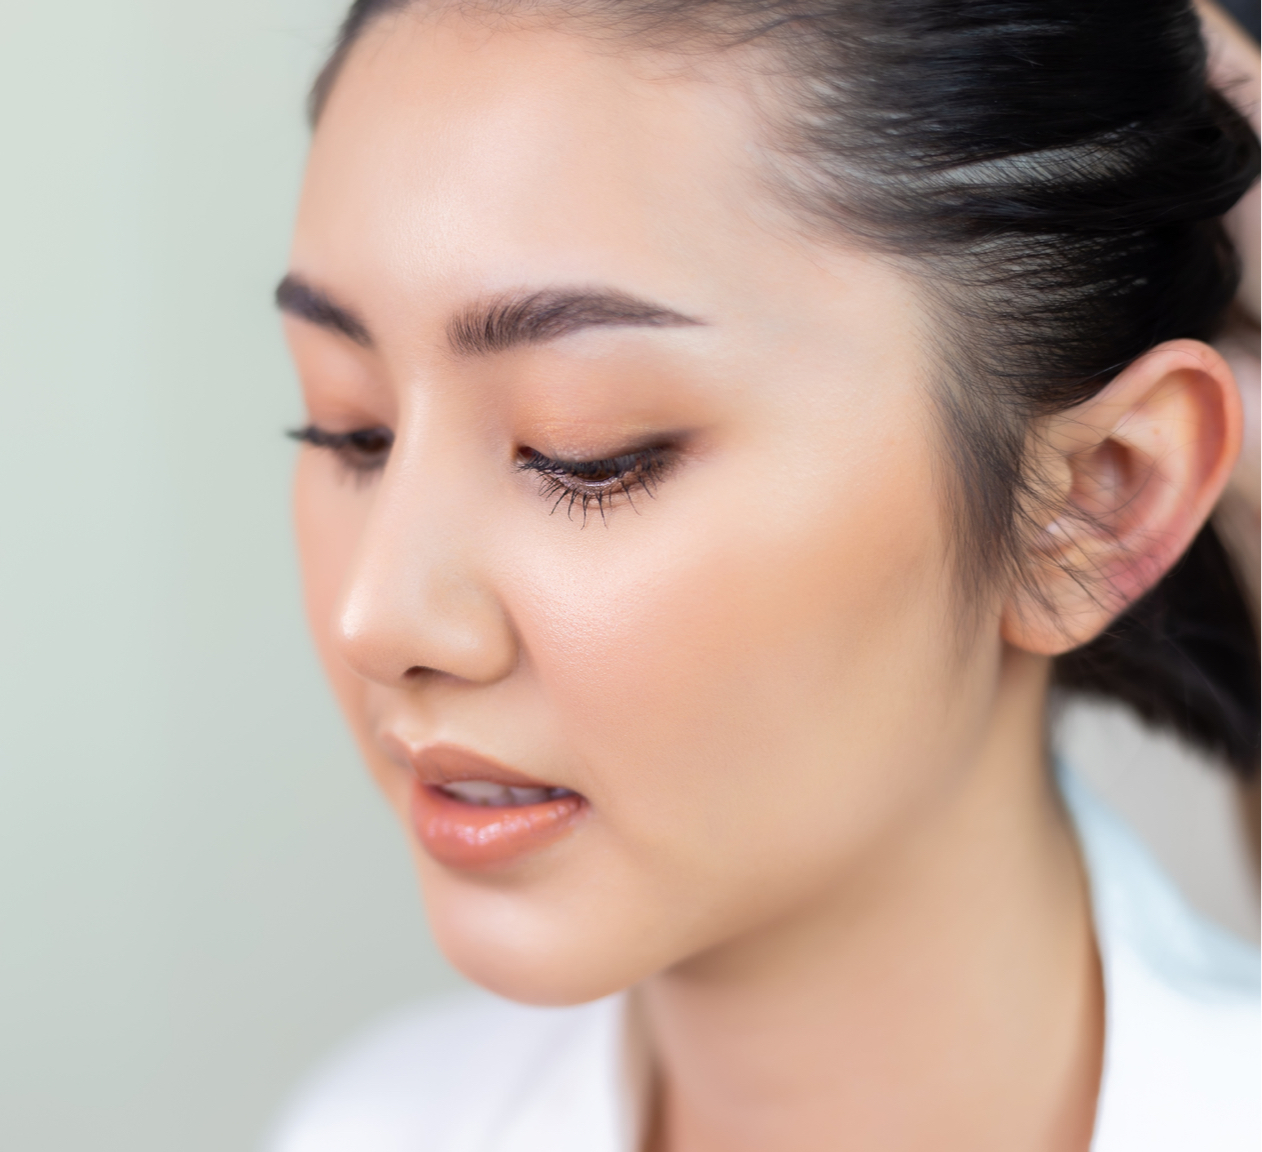 WHAT IS A RHINOPLASTY?